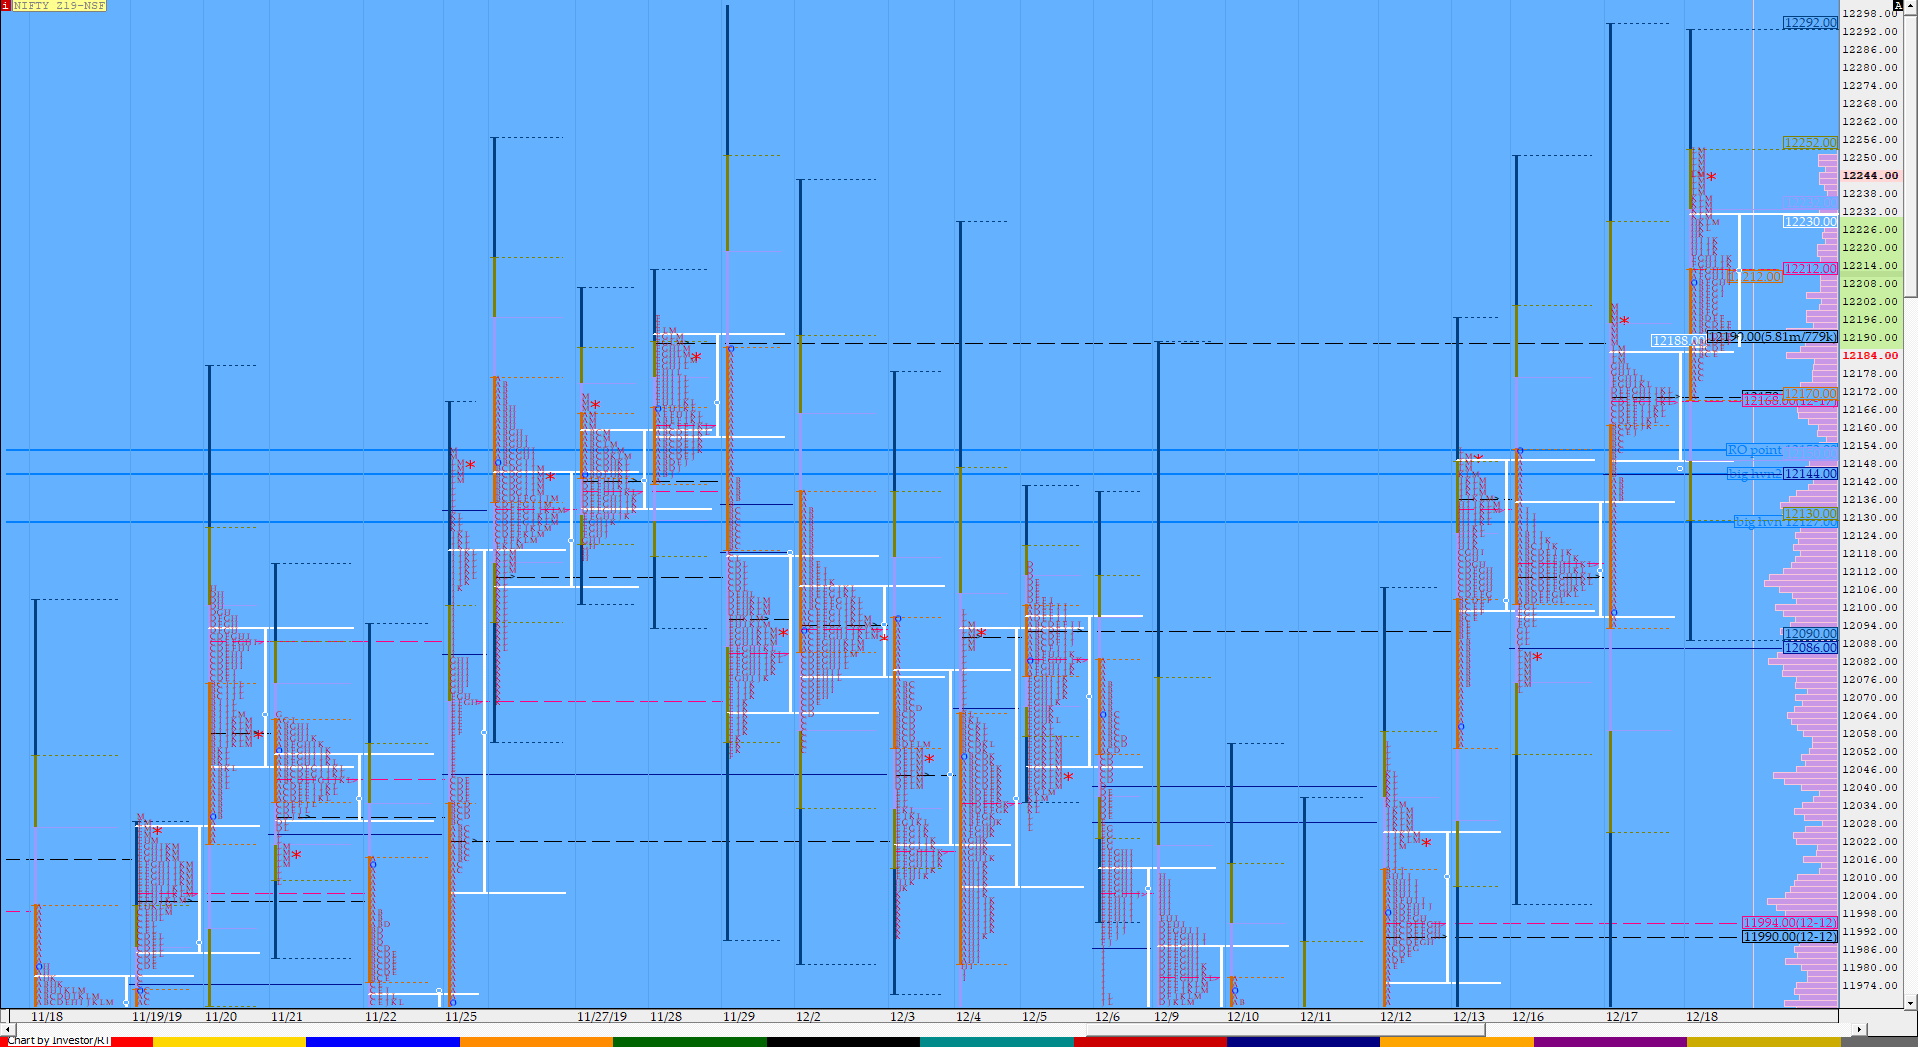 Nf Compo1 13 Market Profile Analysis Dated 18Th December Banknifty Futures, Charts, Day Trading, Intraday Trading, Intraday Trading Strategies, Market Profile, Market Profile Trading Strategies, Nifty Futures, Order Flow Analysis, Support And Resistance, Technical Analysis, Trading Strategies, Volume Profile Trading